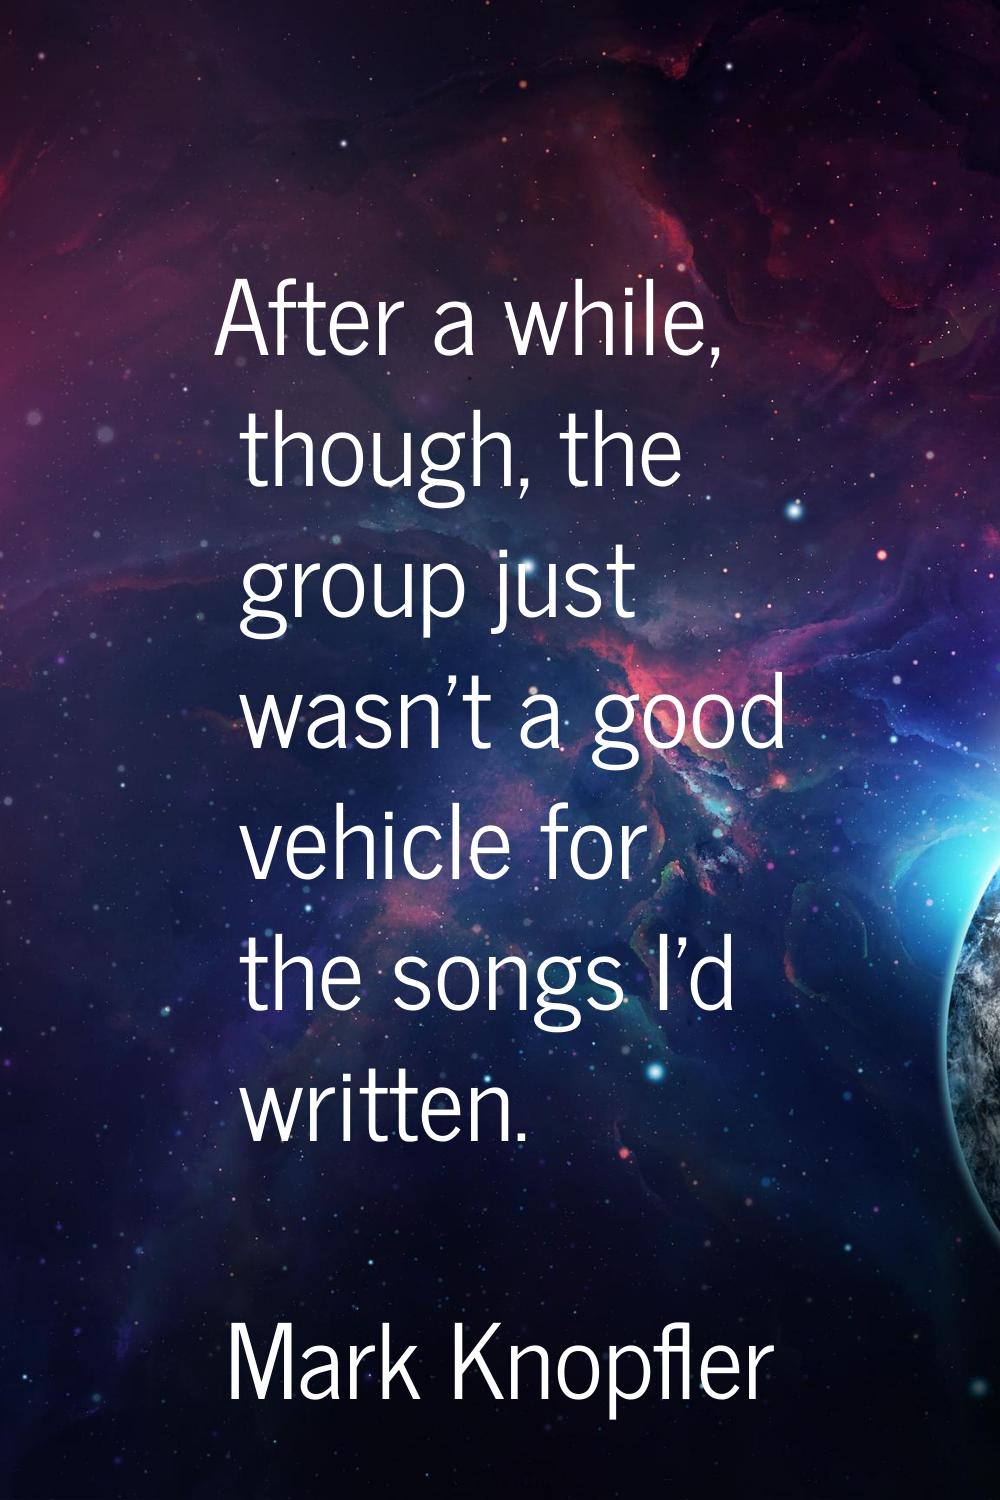 After a while, though, the group just wasn't a good vehicle for the songs I'd written.